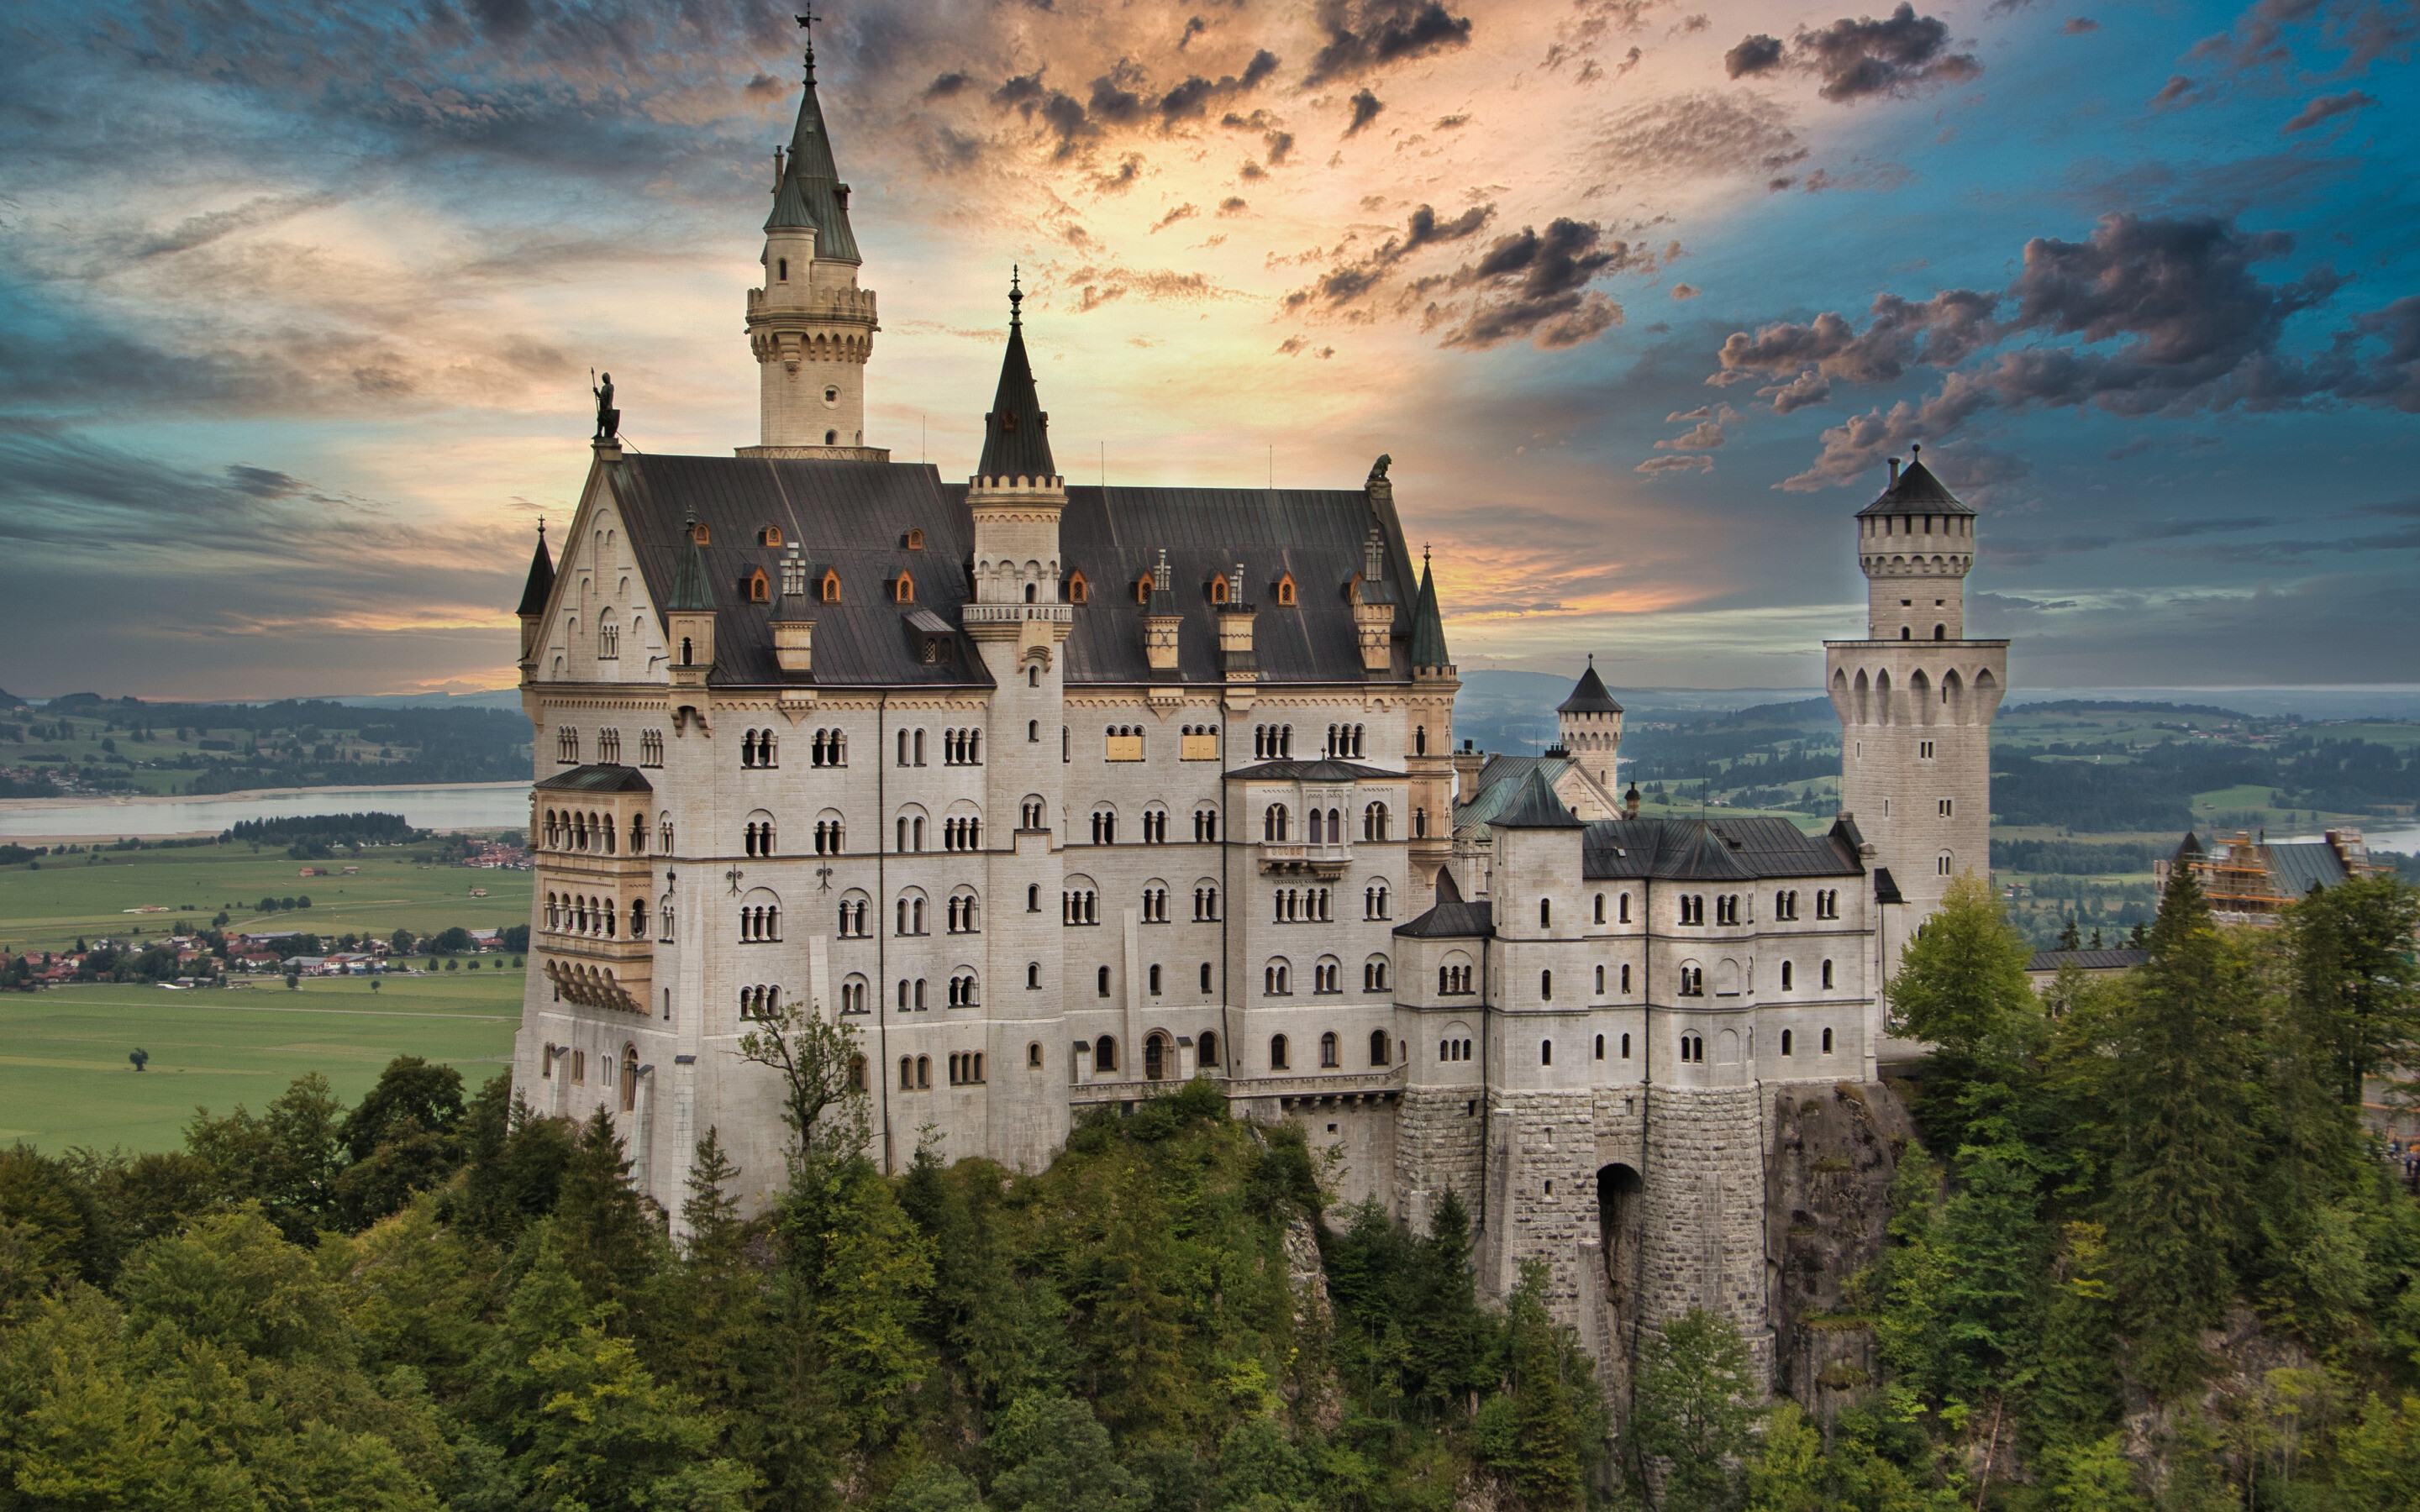 Neuschwanstein Castle: A monument to medieval culture and kingship, Bavaria, Germany. 2880x1800 HD Wallpaper.